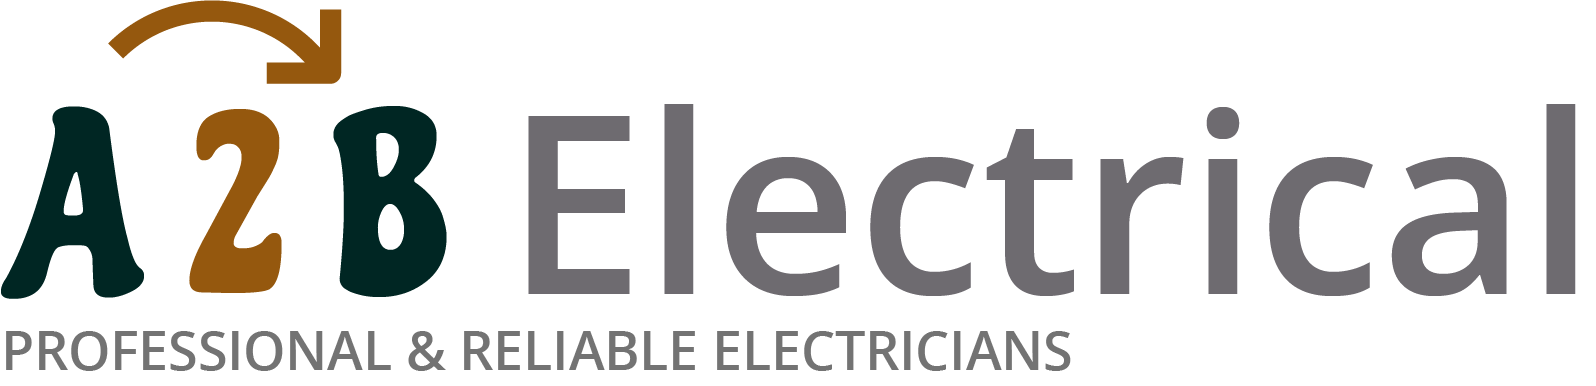 If you have electrical wiring problems in Billingham, we can provide an electrician to have a look for you. 